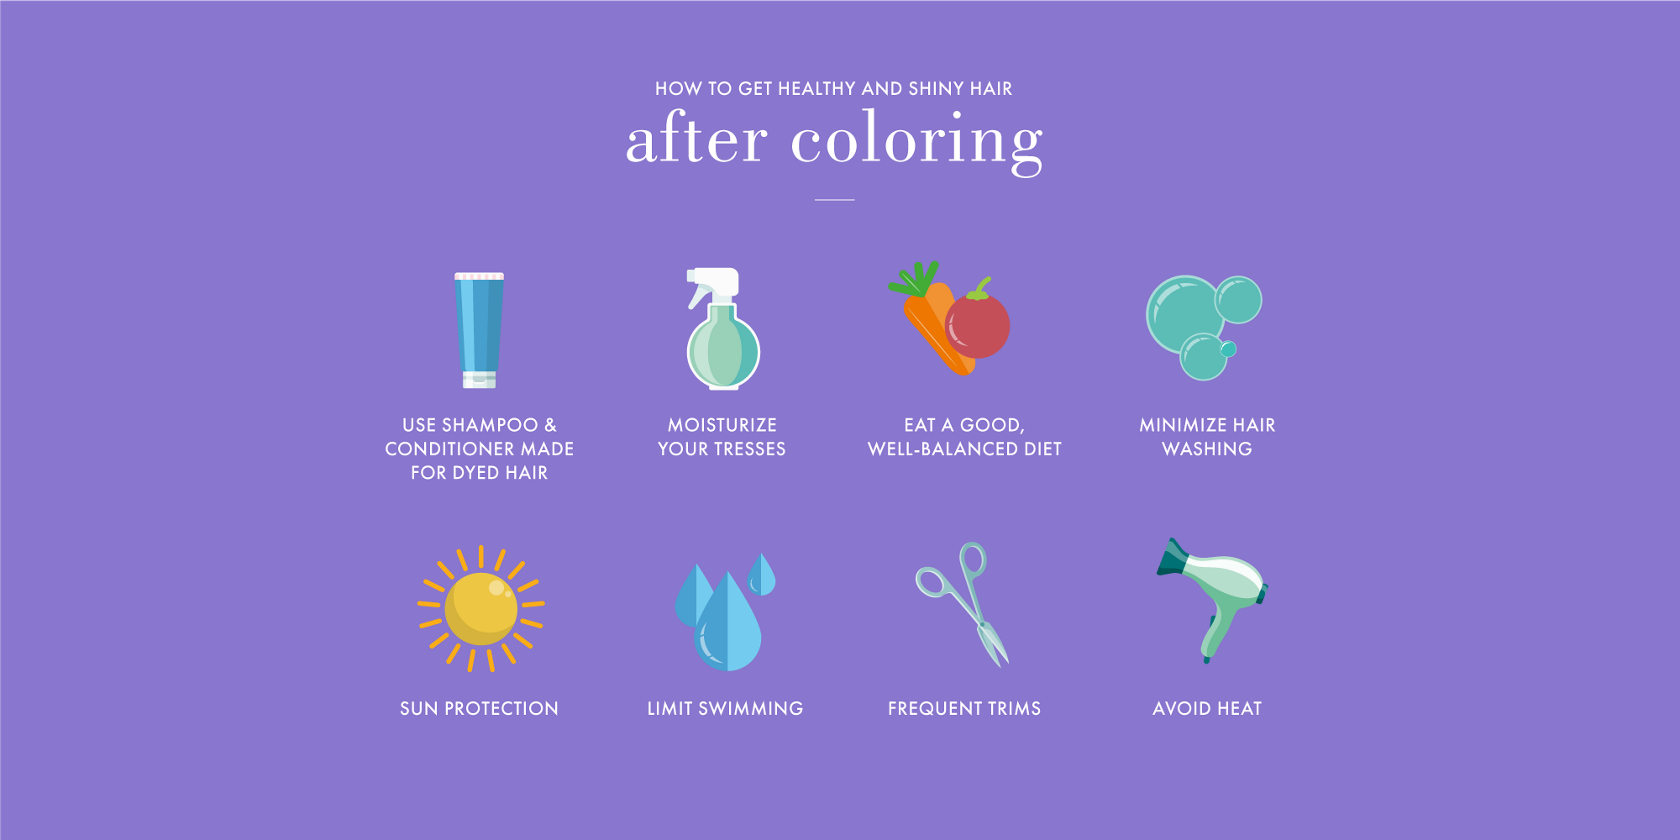 How to Keep Healthy and Shiny Hair After Coloring